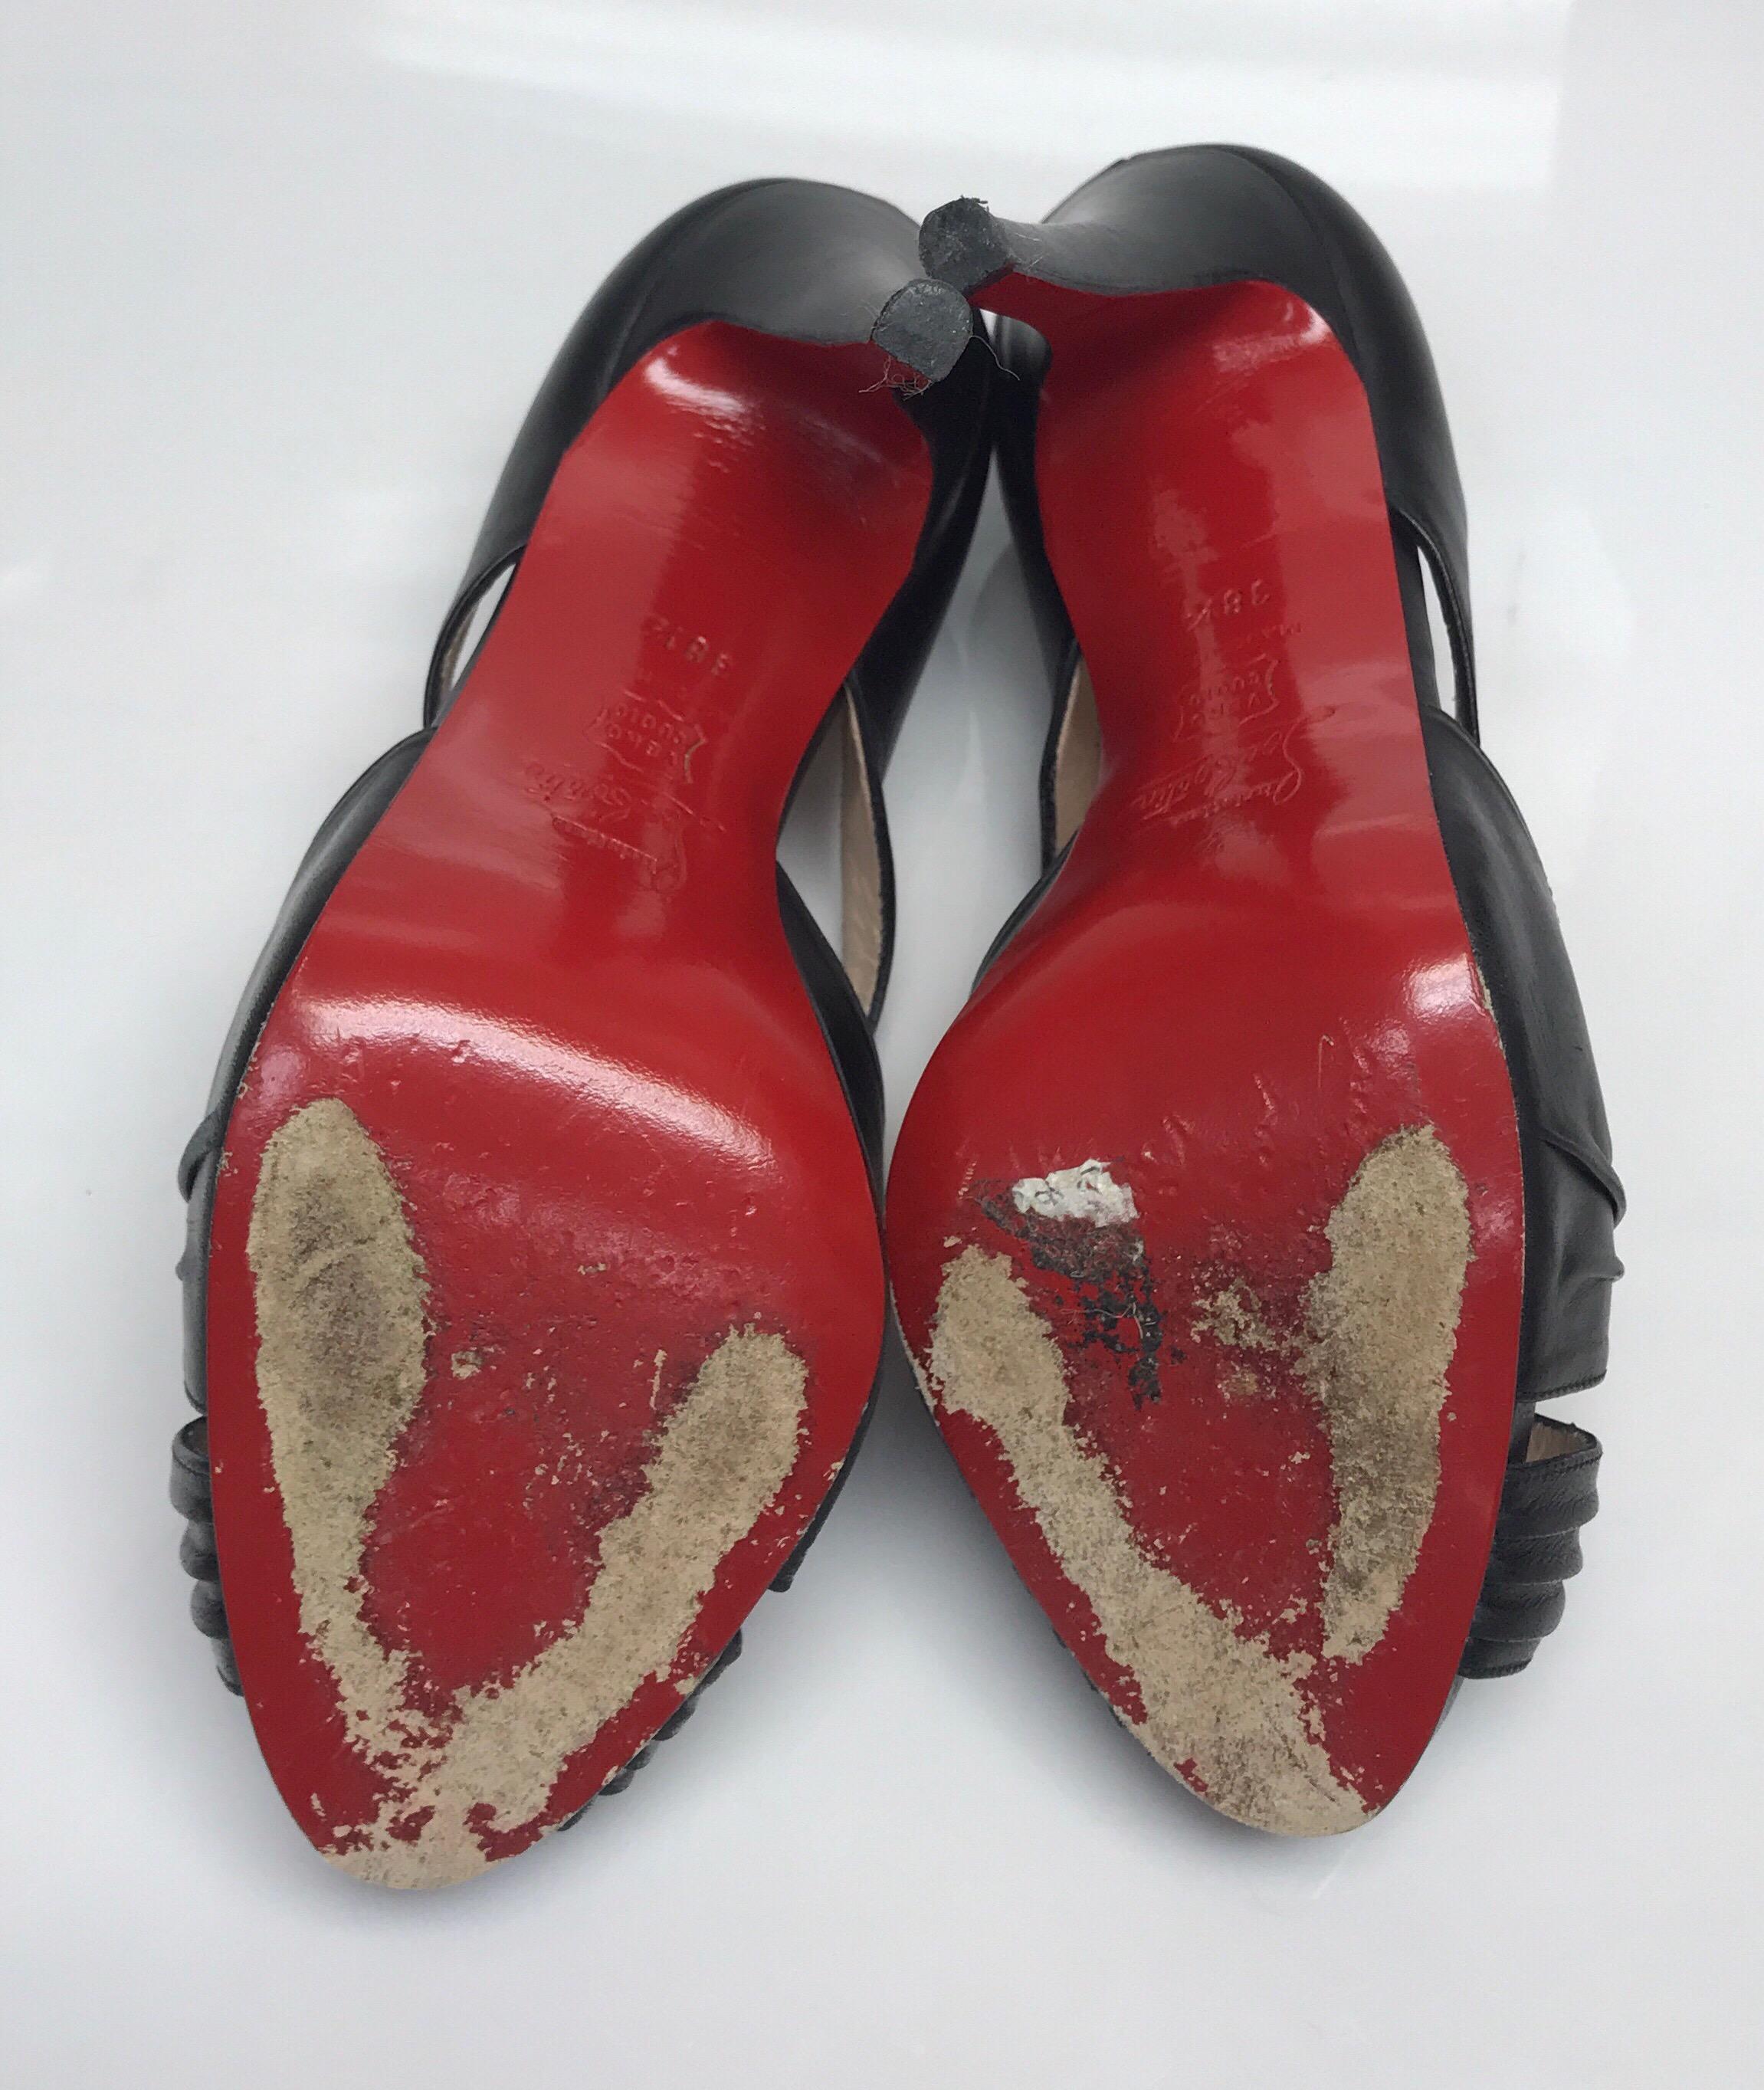 Christian Louboutin Black Strappy Platform Shoes-38.5 In Good Condition For Sale In West Palm Beach, FL